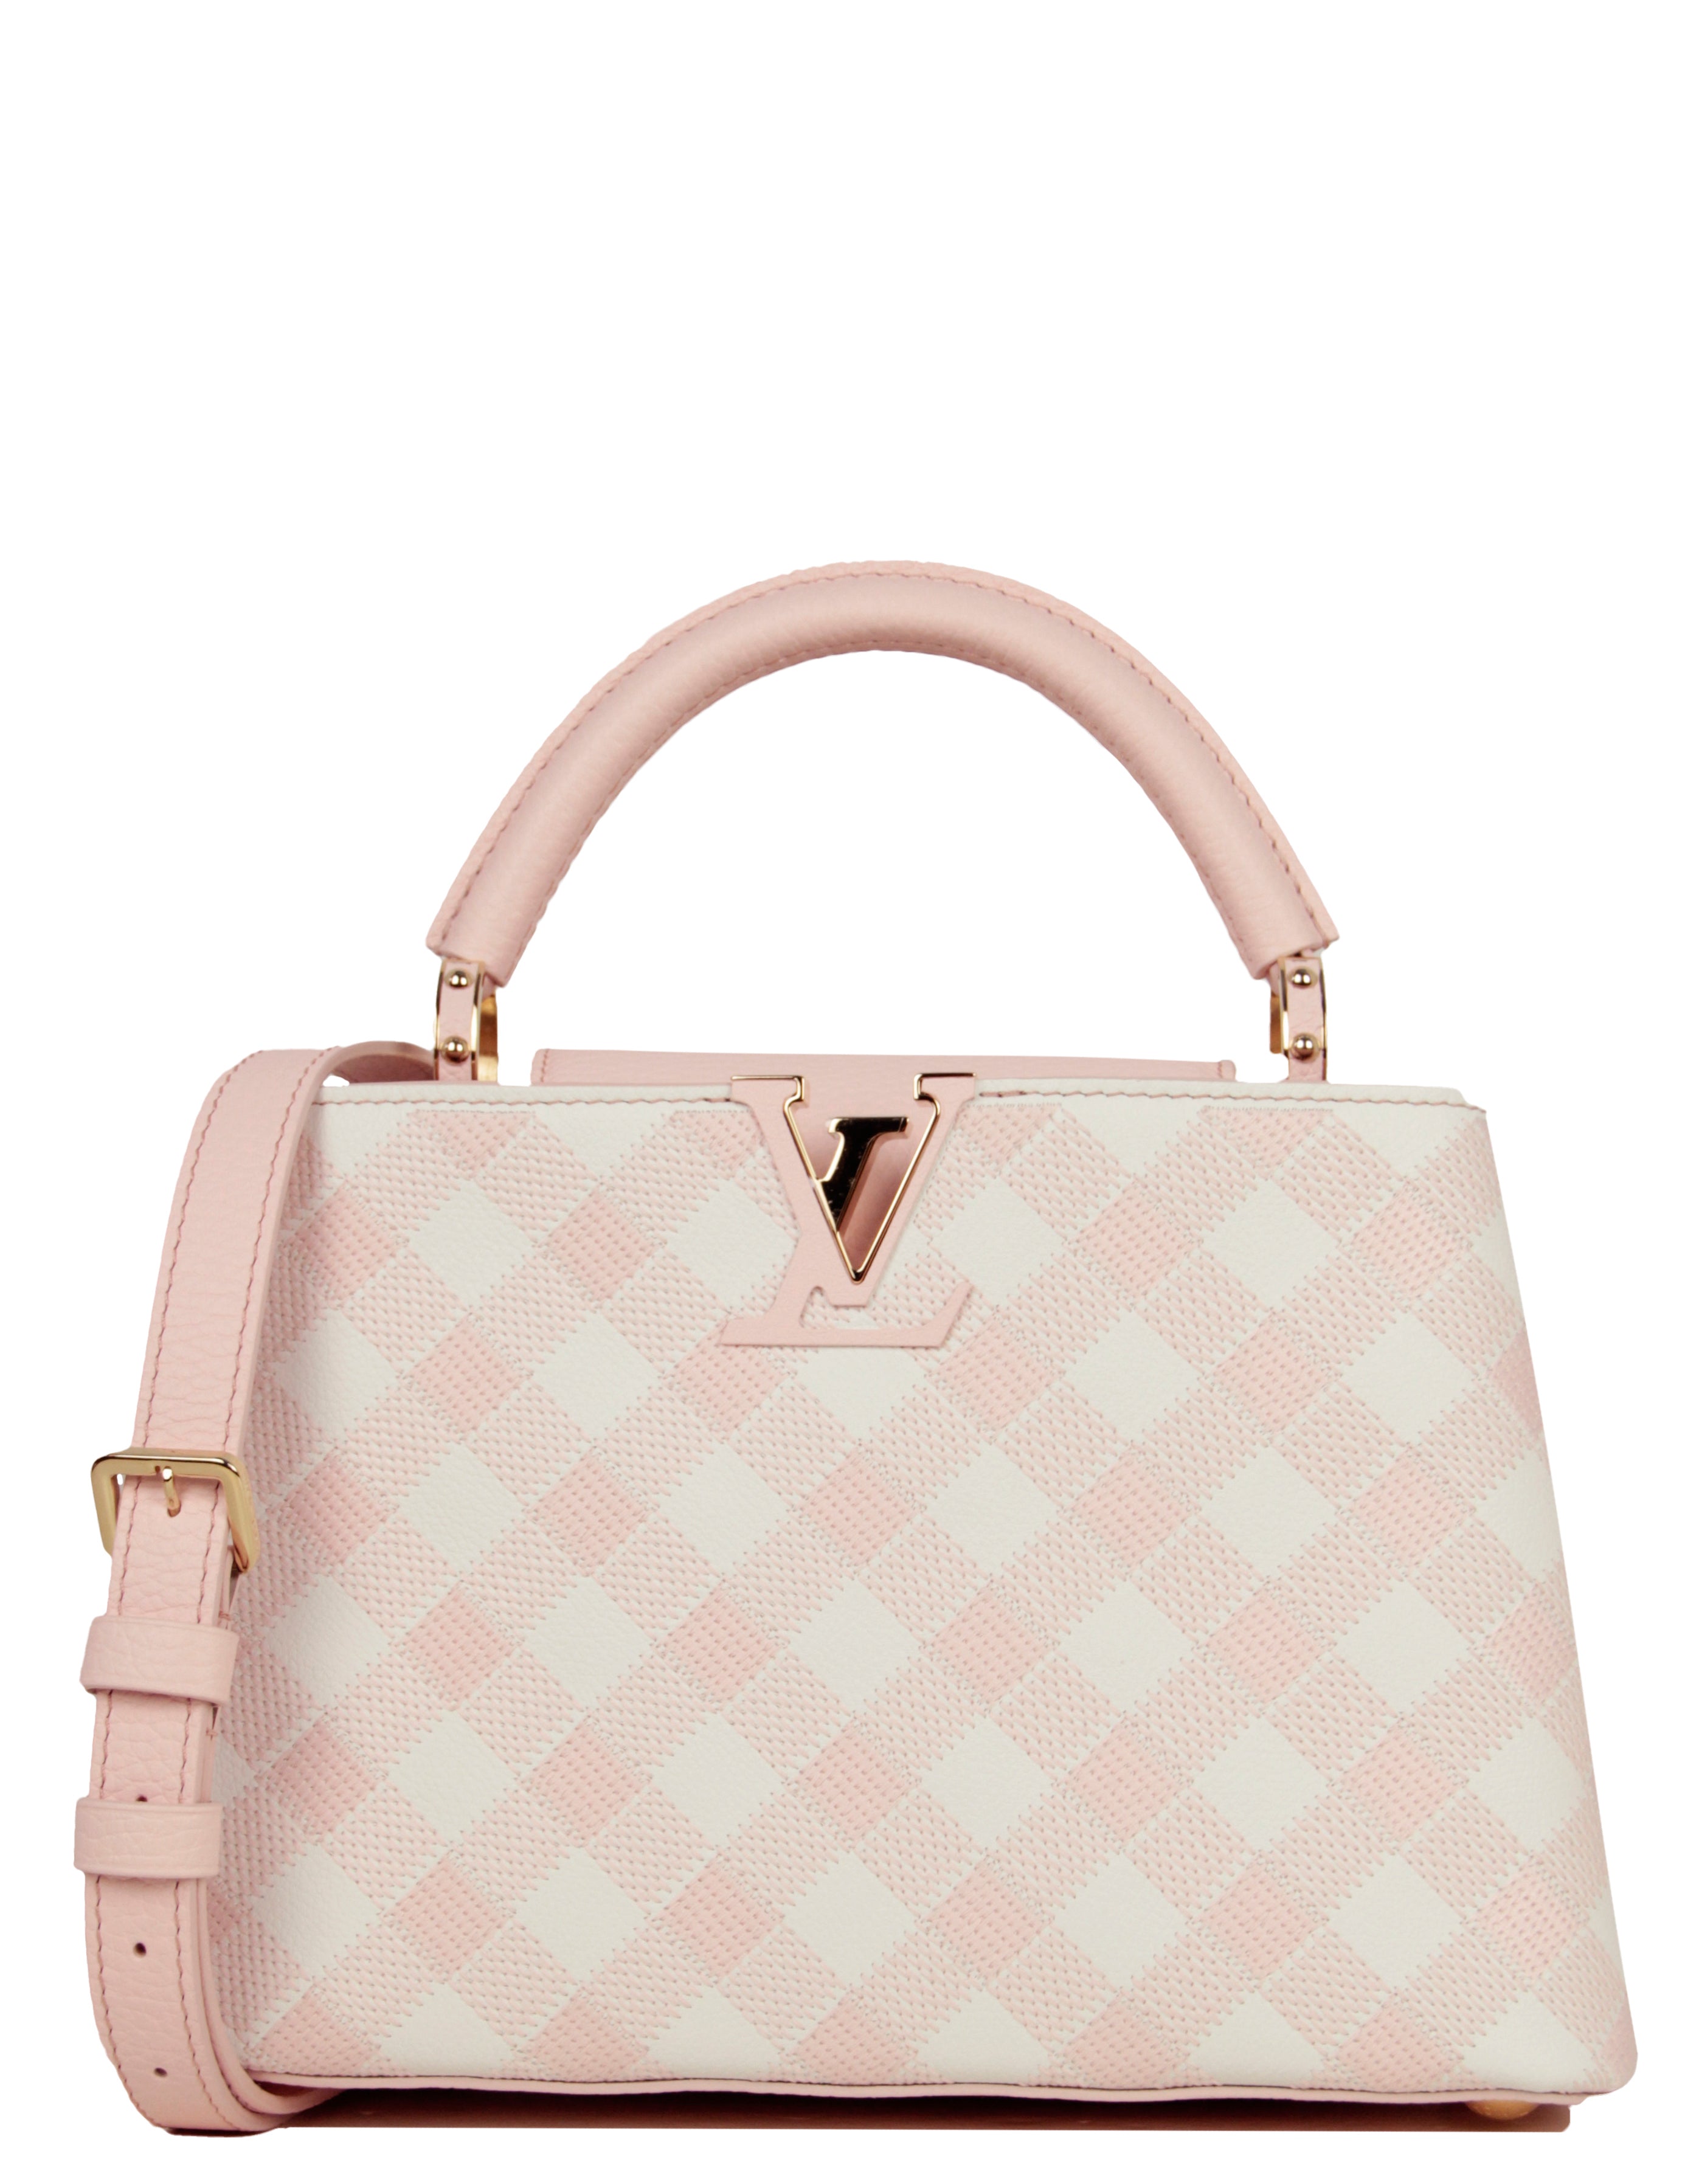 Louis Vuitton Light Pink Taurillon Embroidered Vichy Capucines BB Bag